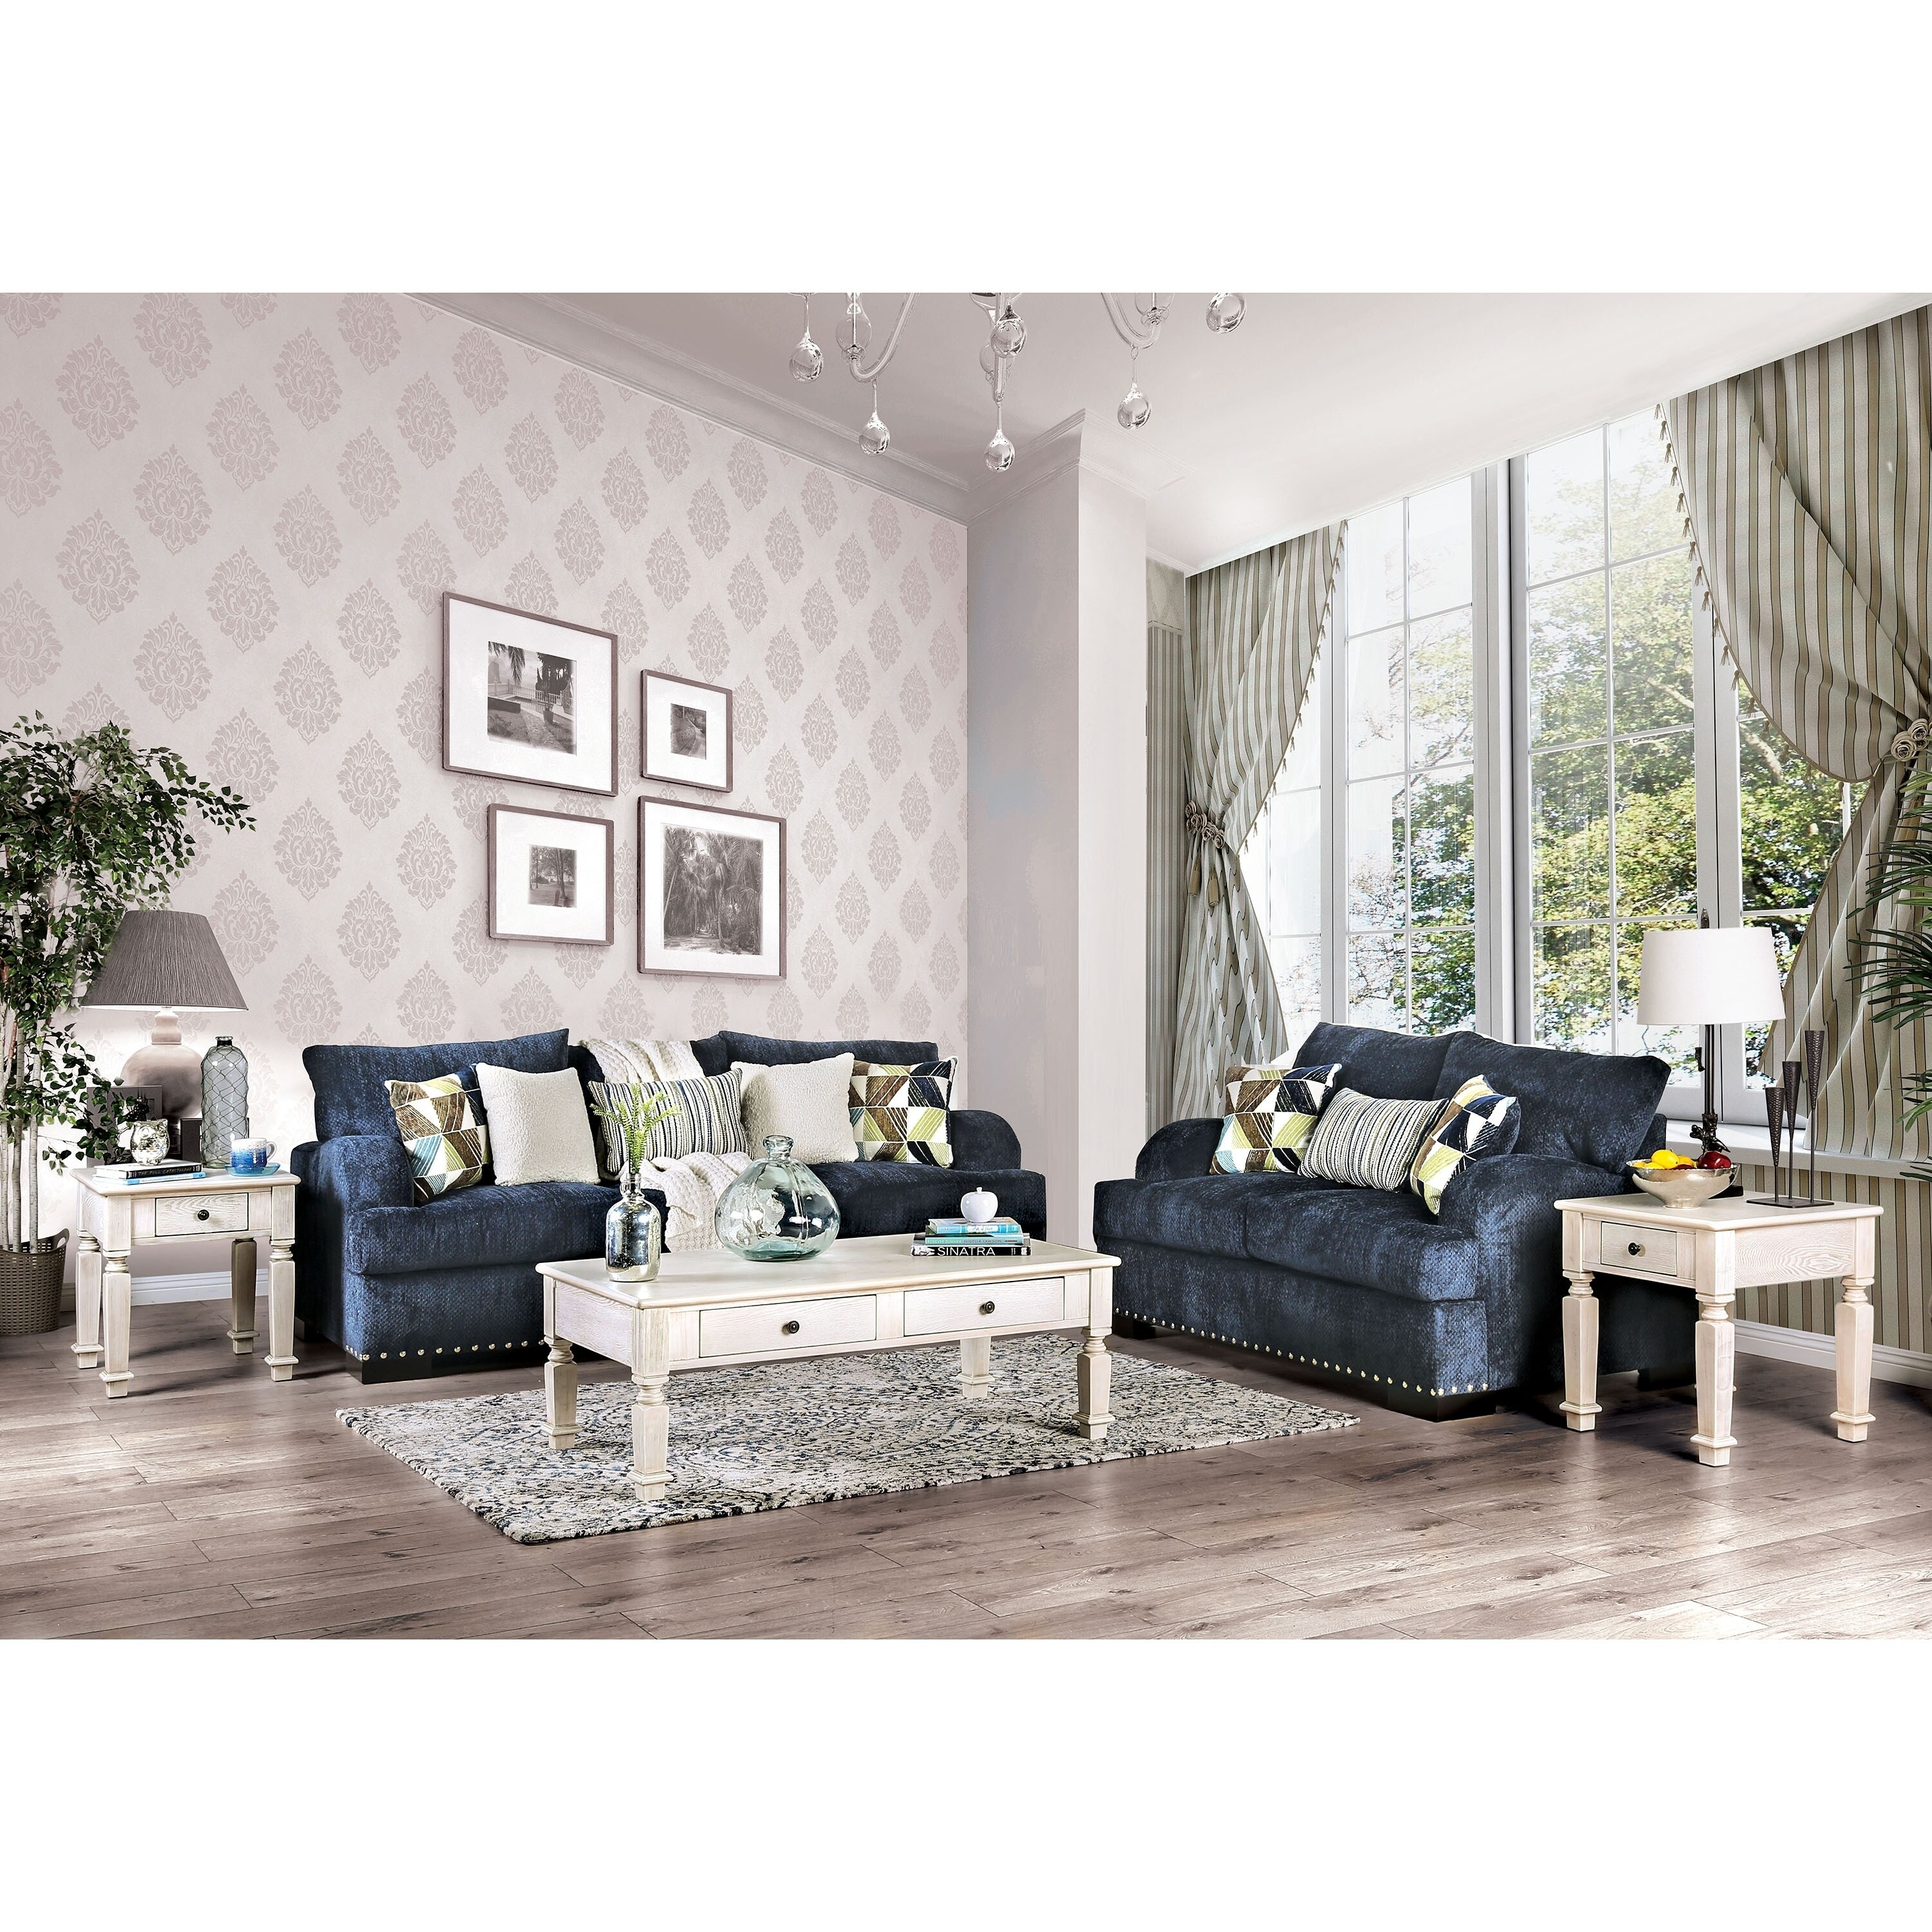 The Curated Nomad Hamerton Contemporary Navy 2 Piece Living Room Set